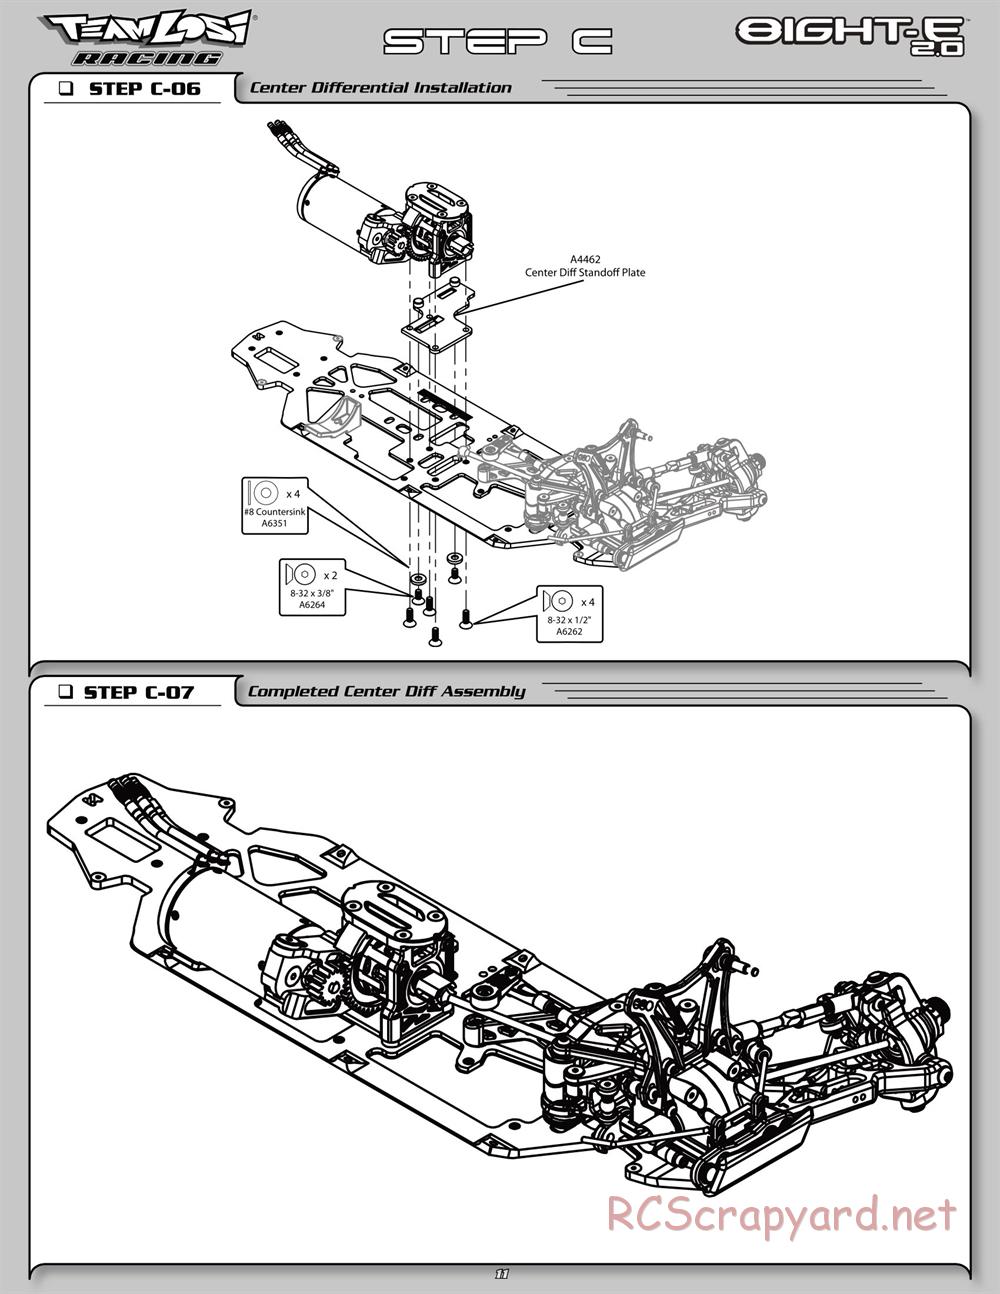 Team Losi - 8ight-E 2.0 Race Roller - Manual - Page 18